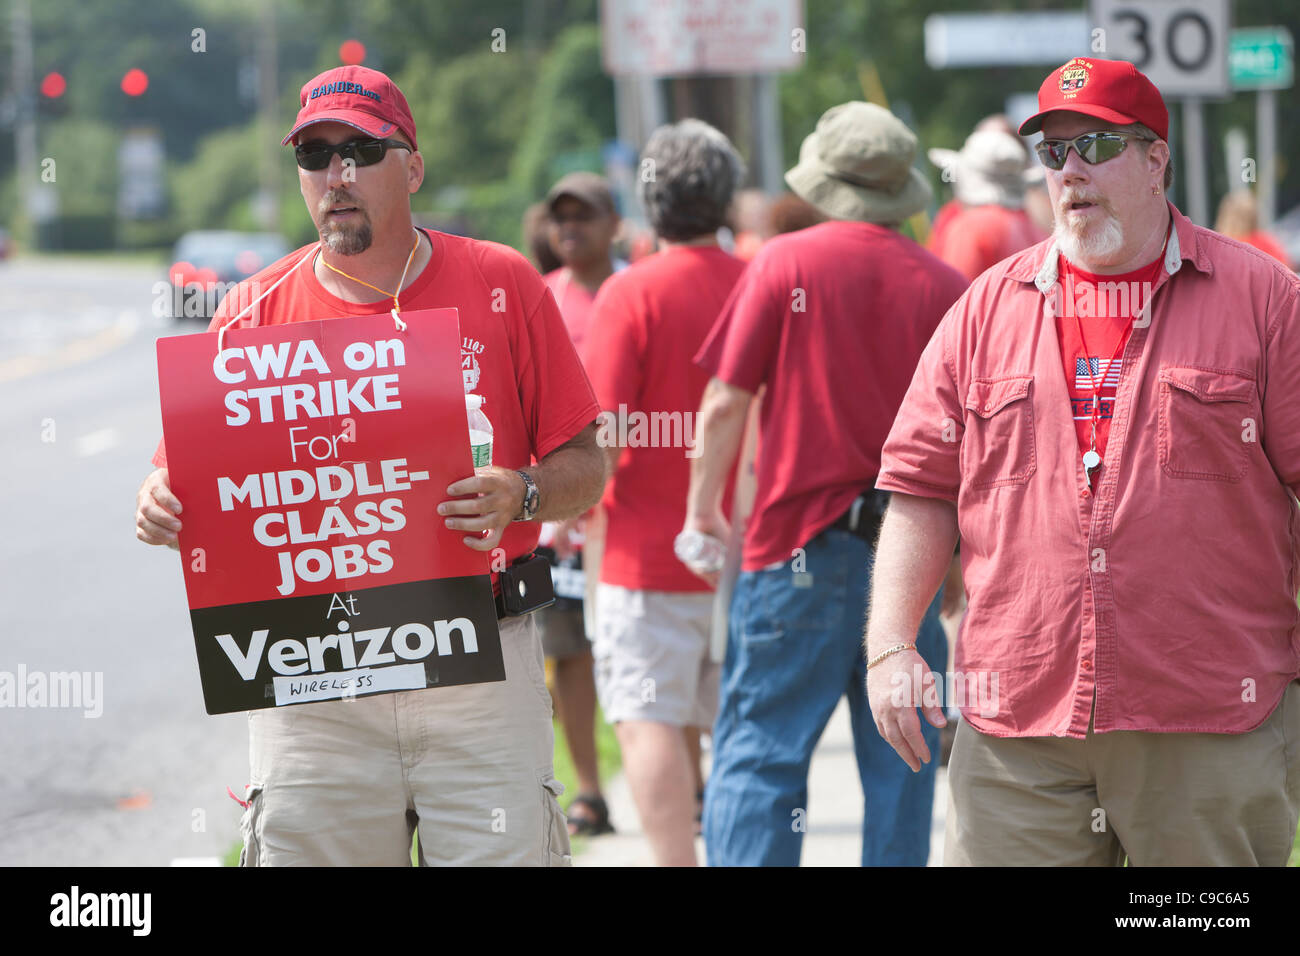 On-strike Verizon employees picket on the street in front of a Verizon Wireless store Stock Photo